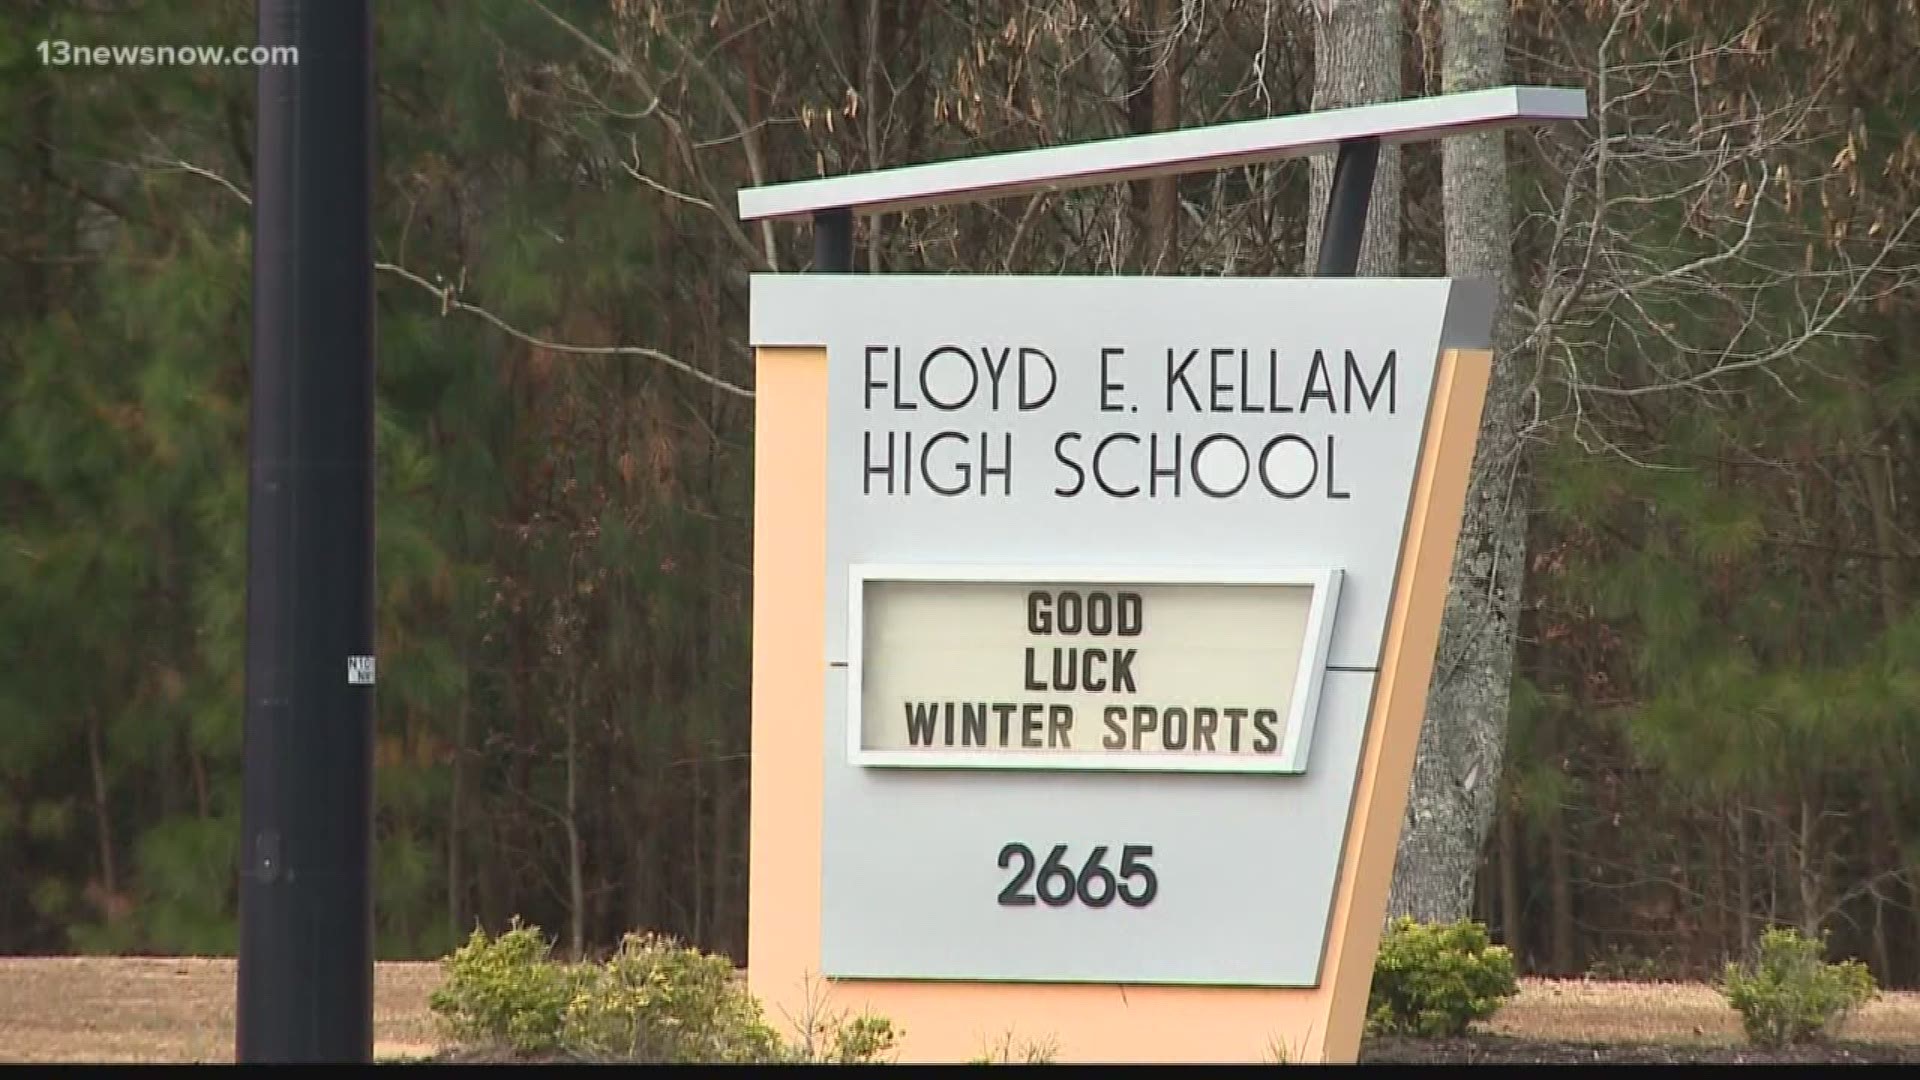 A threat against a high school in Virginia Beach has some people on edge.